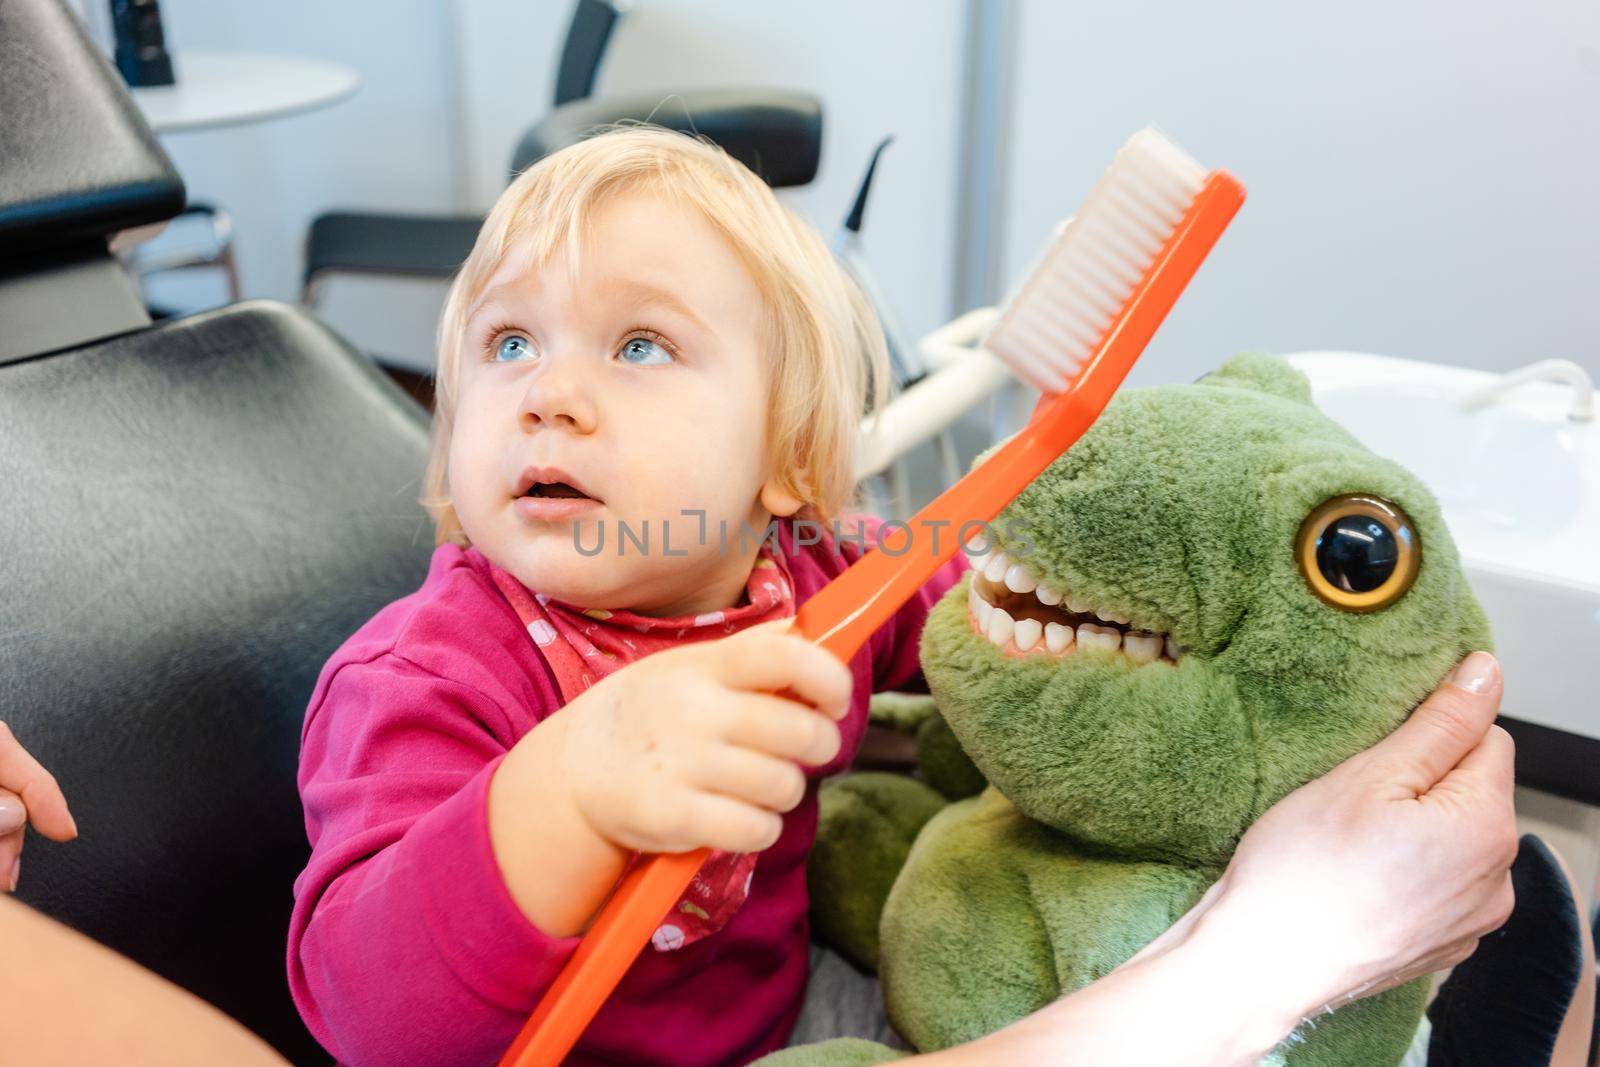 Child at the dentist brushing teeth of a plush toy by Kzenon